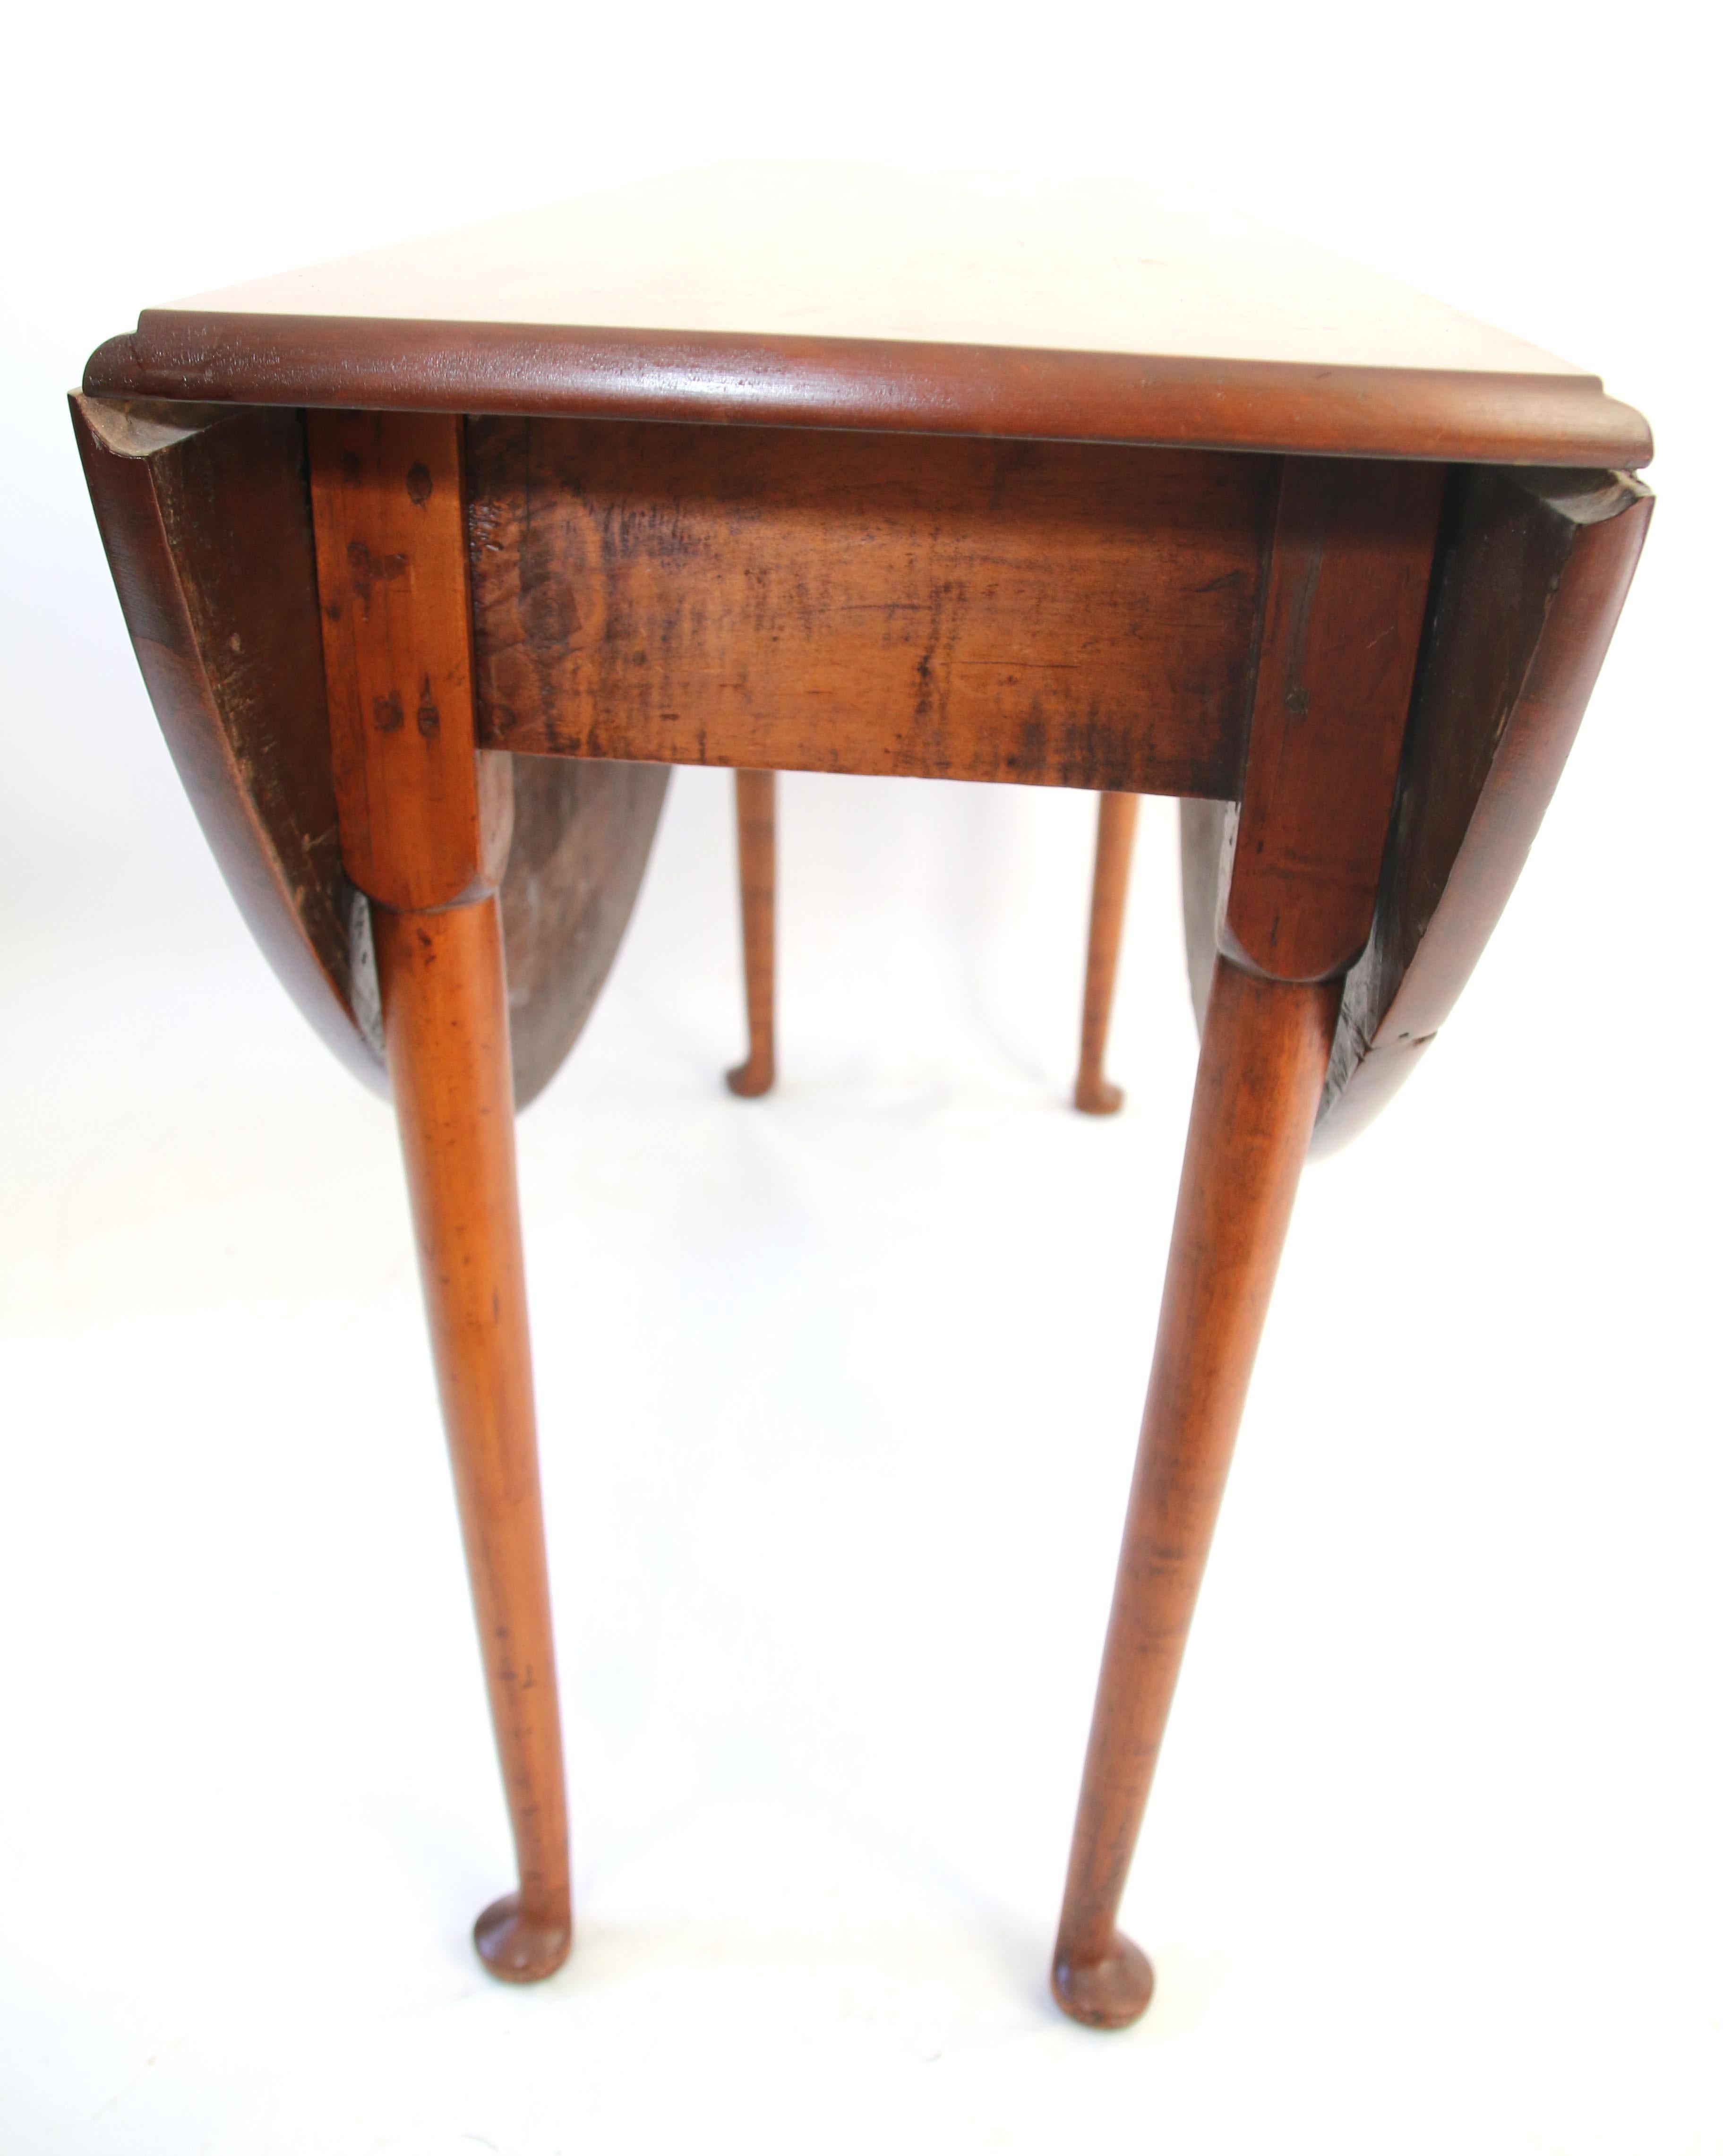 Late 18th Century 18th Century, New England Queen Anne Tiger Maple Drop-Leaf Table